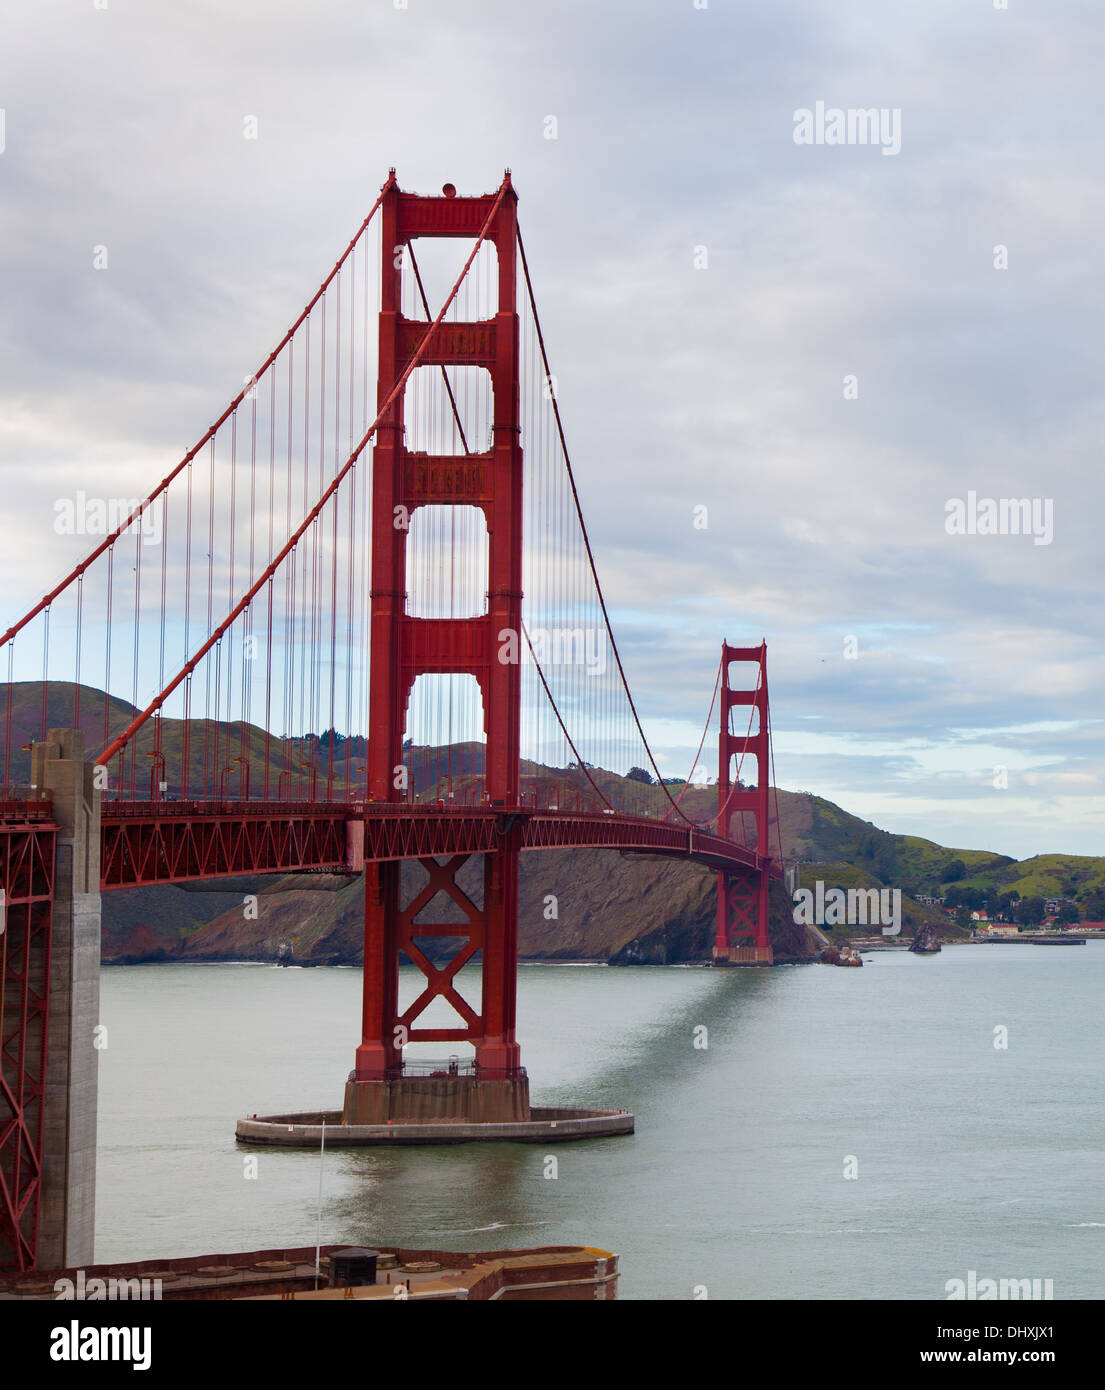 A view of the Golden Gate Bridge in San Francisco Stock Photo